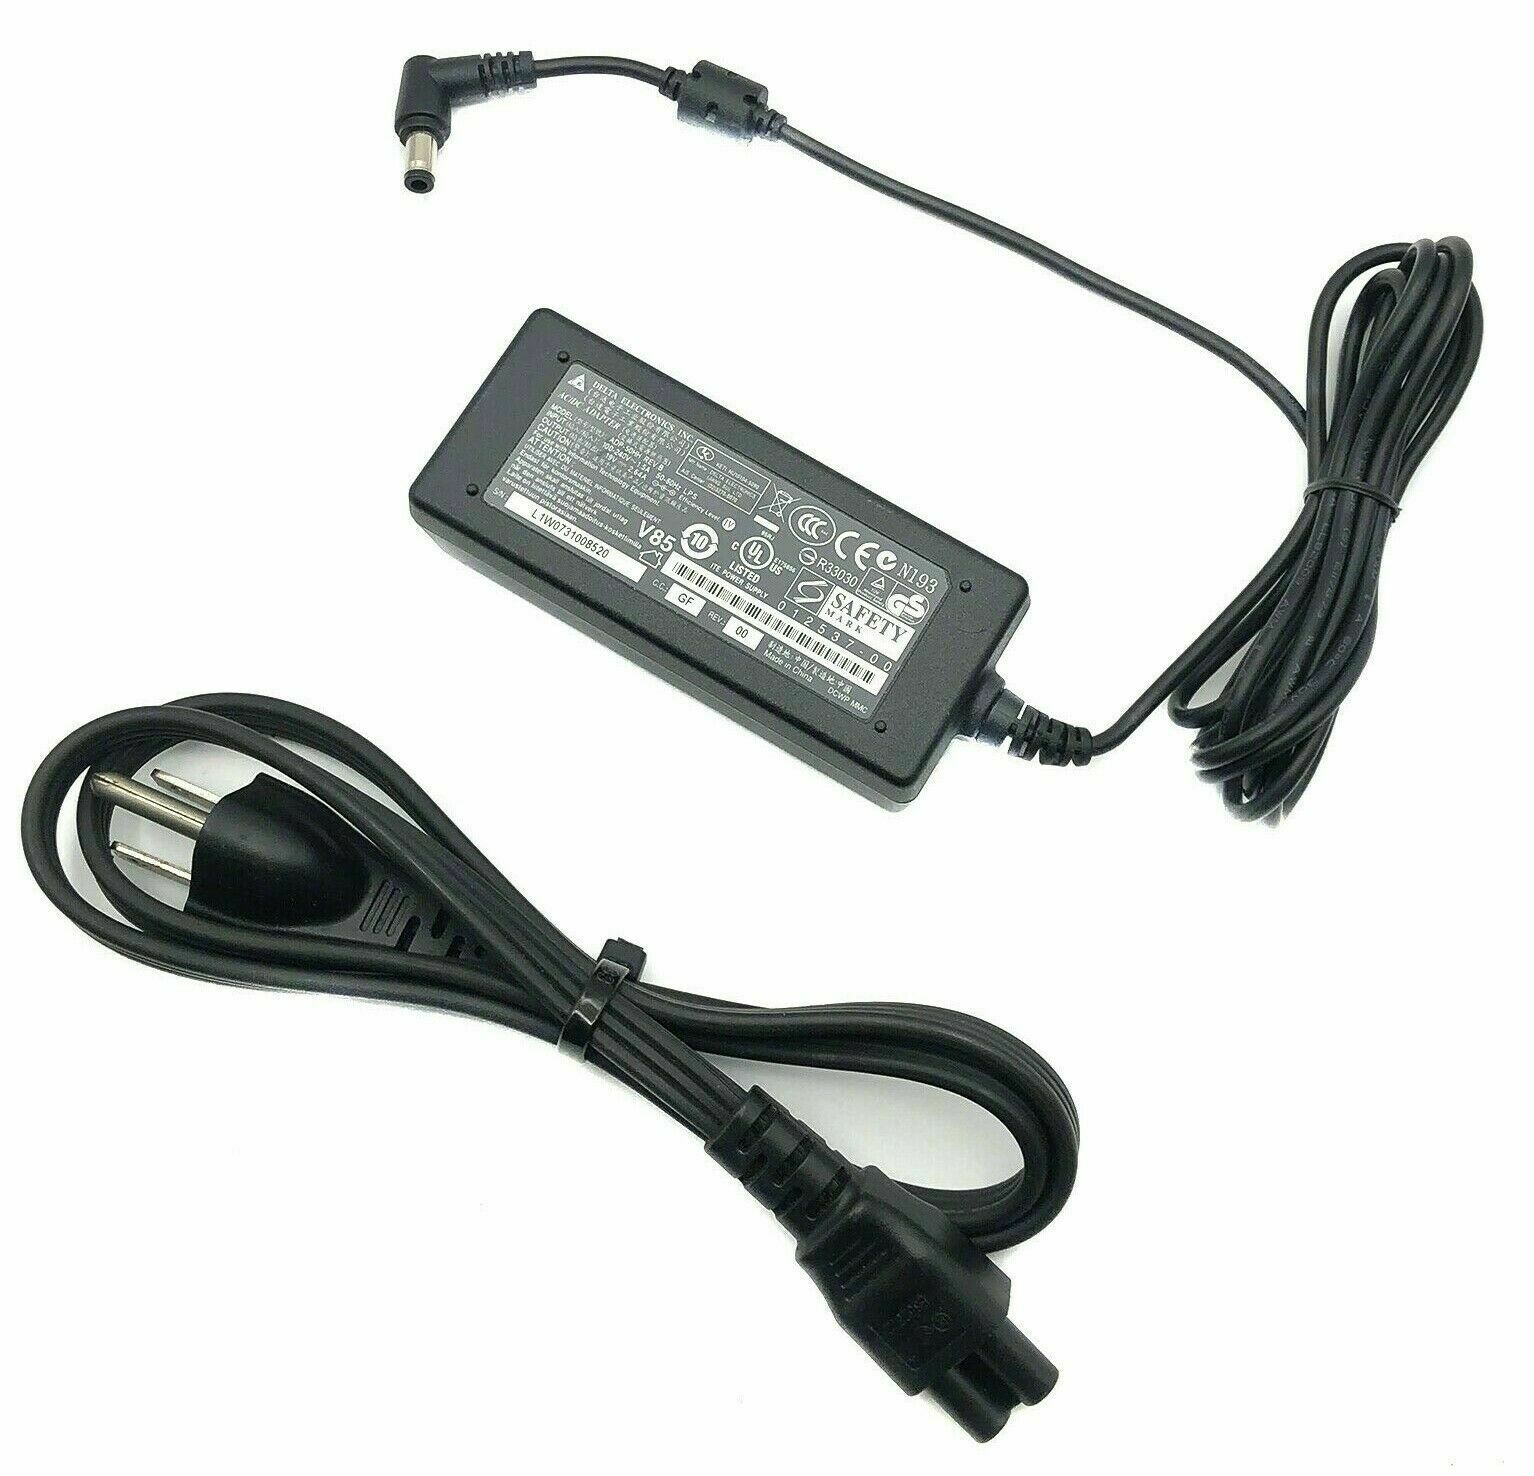 Genuine Delta AC Adapter For Motion J3400 J3500 J3600 Tablet Charger W/Cord OEM Compatible Brand: - Click Image to Close